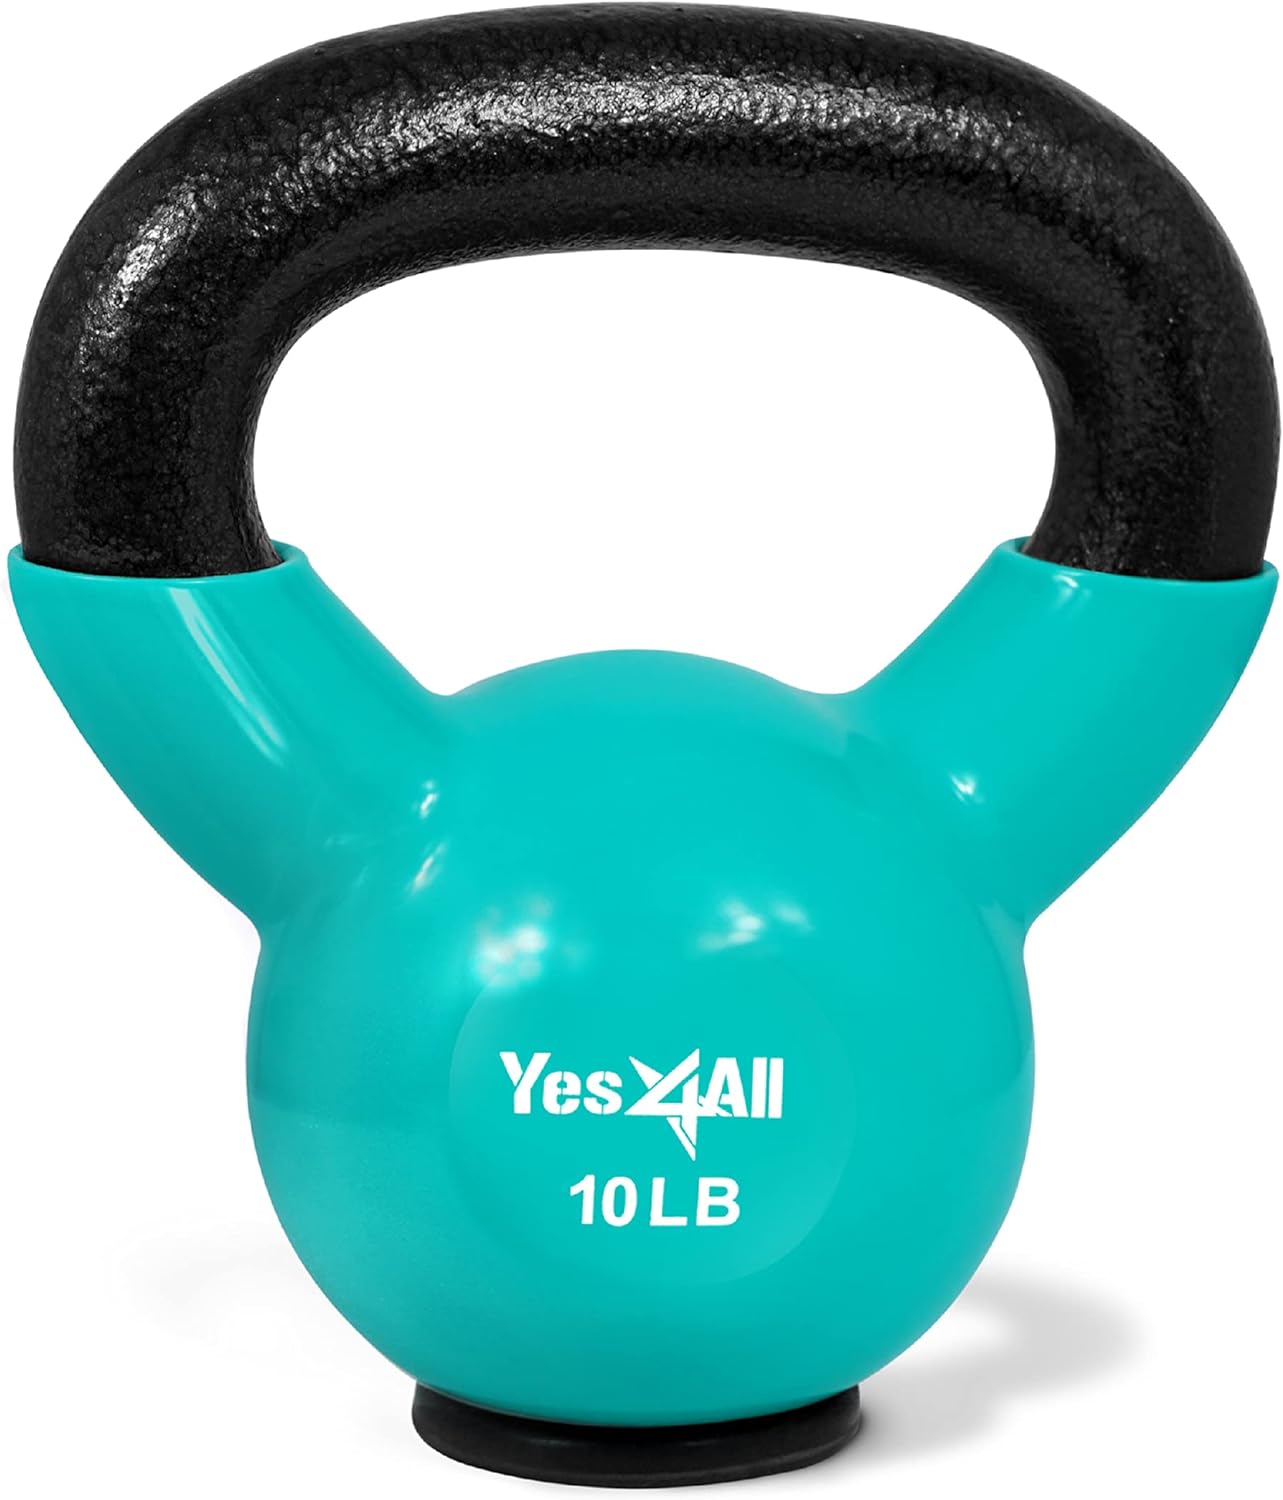 Yes4All 10lb Vinyl Coated / PVC Kettlebell with Rubber Base, Peacock Blue, Single - image 1 of 2